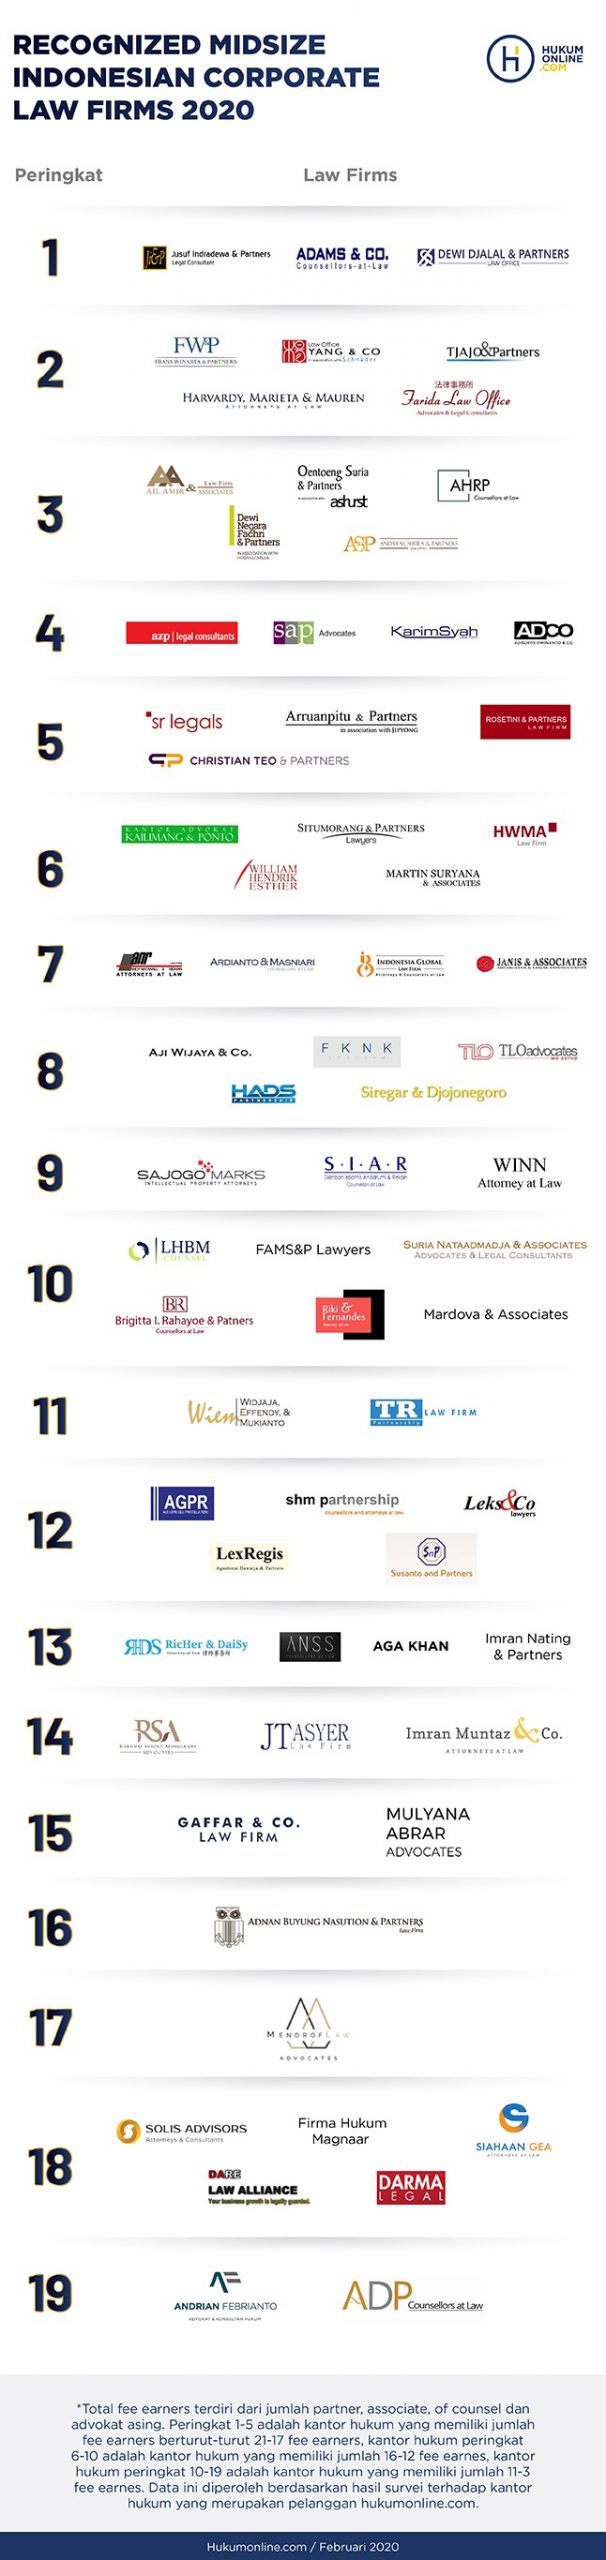 Recognized Midsize Indonesian Corporate Law Firms 2020